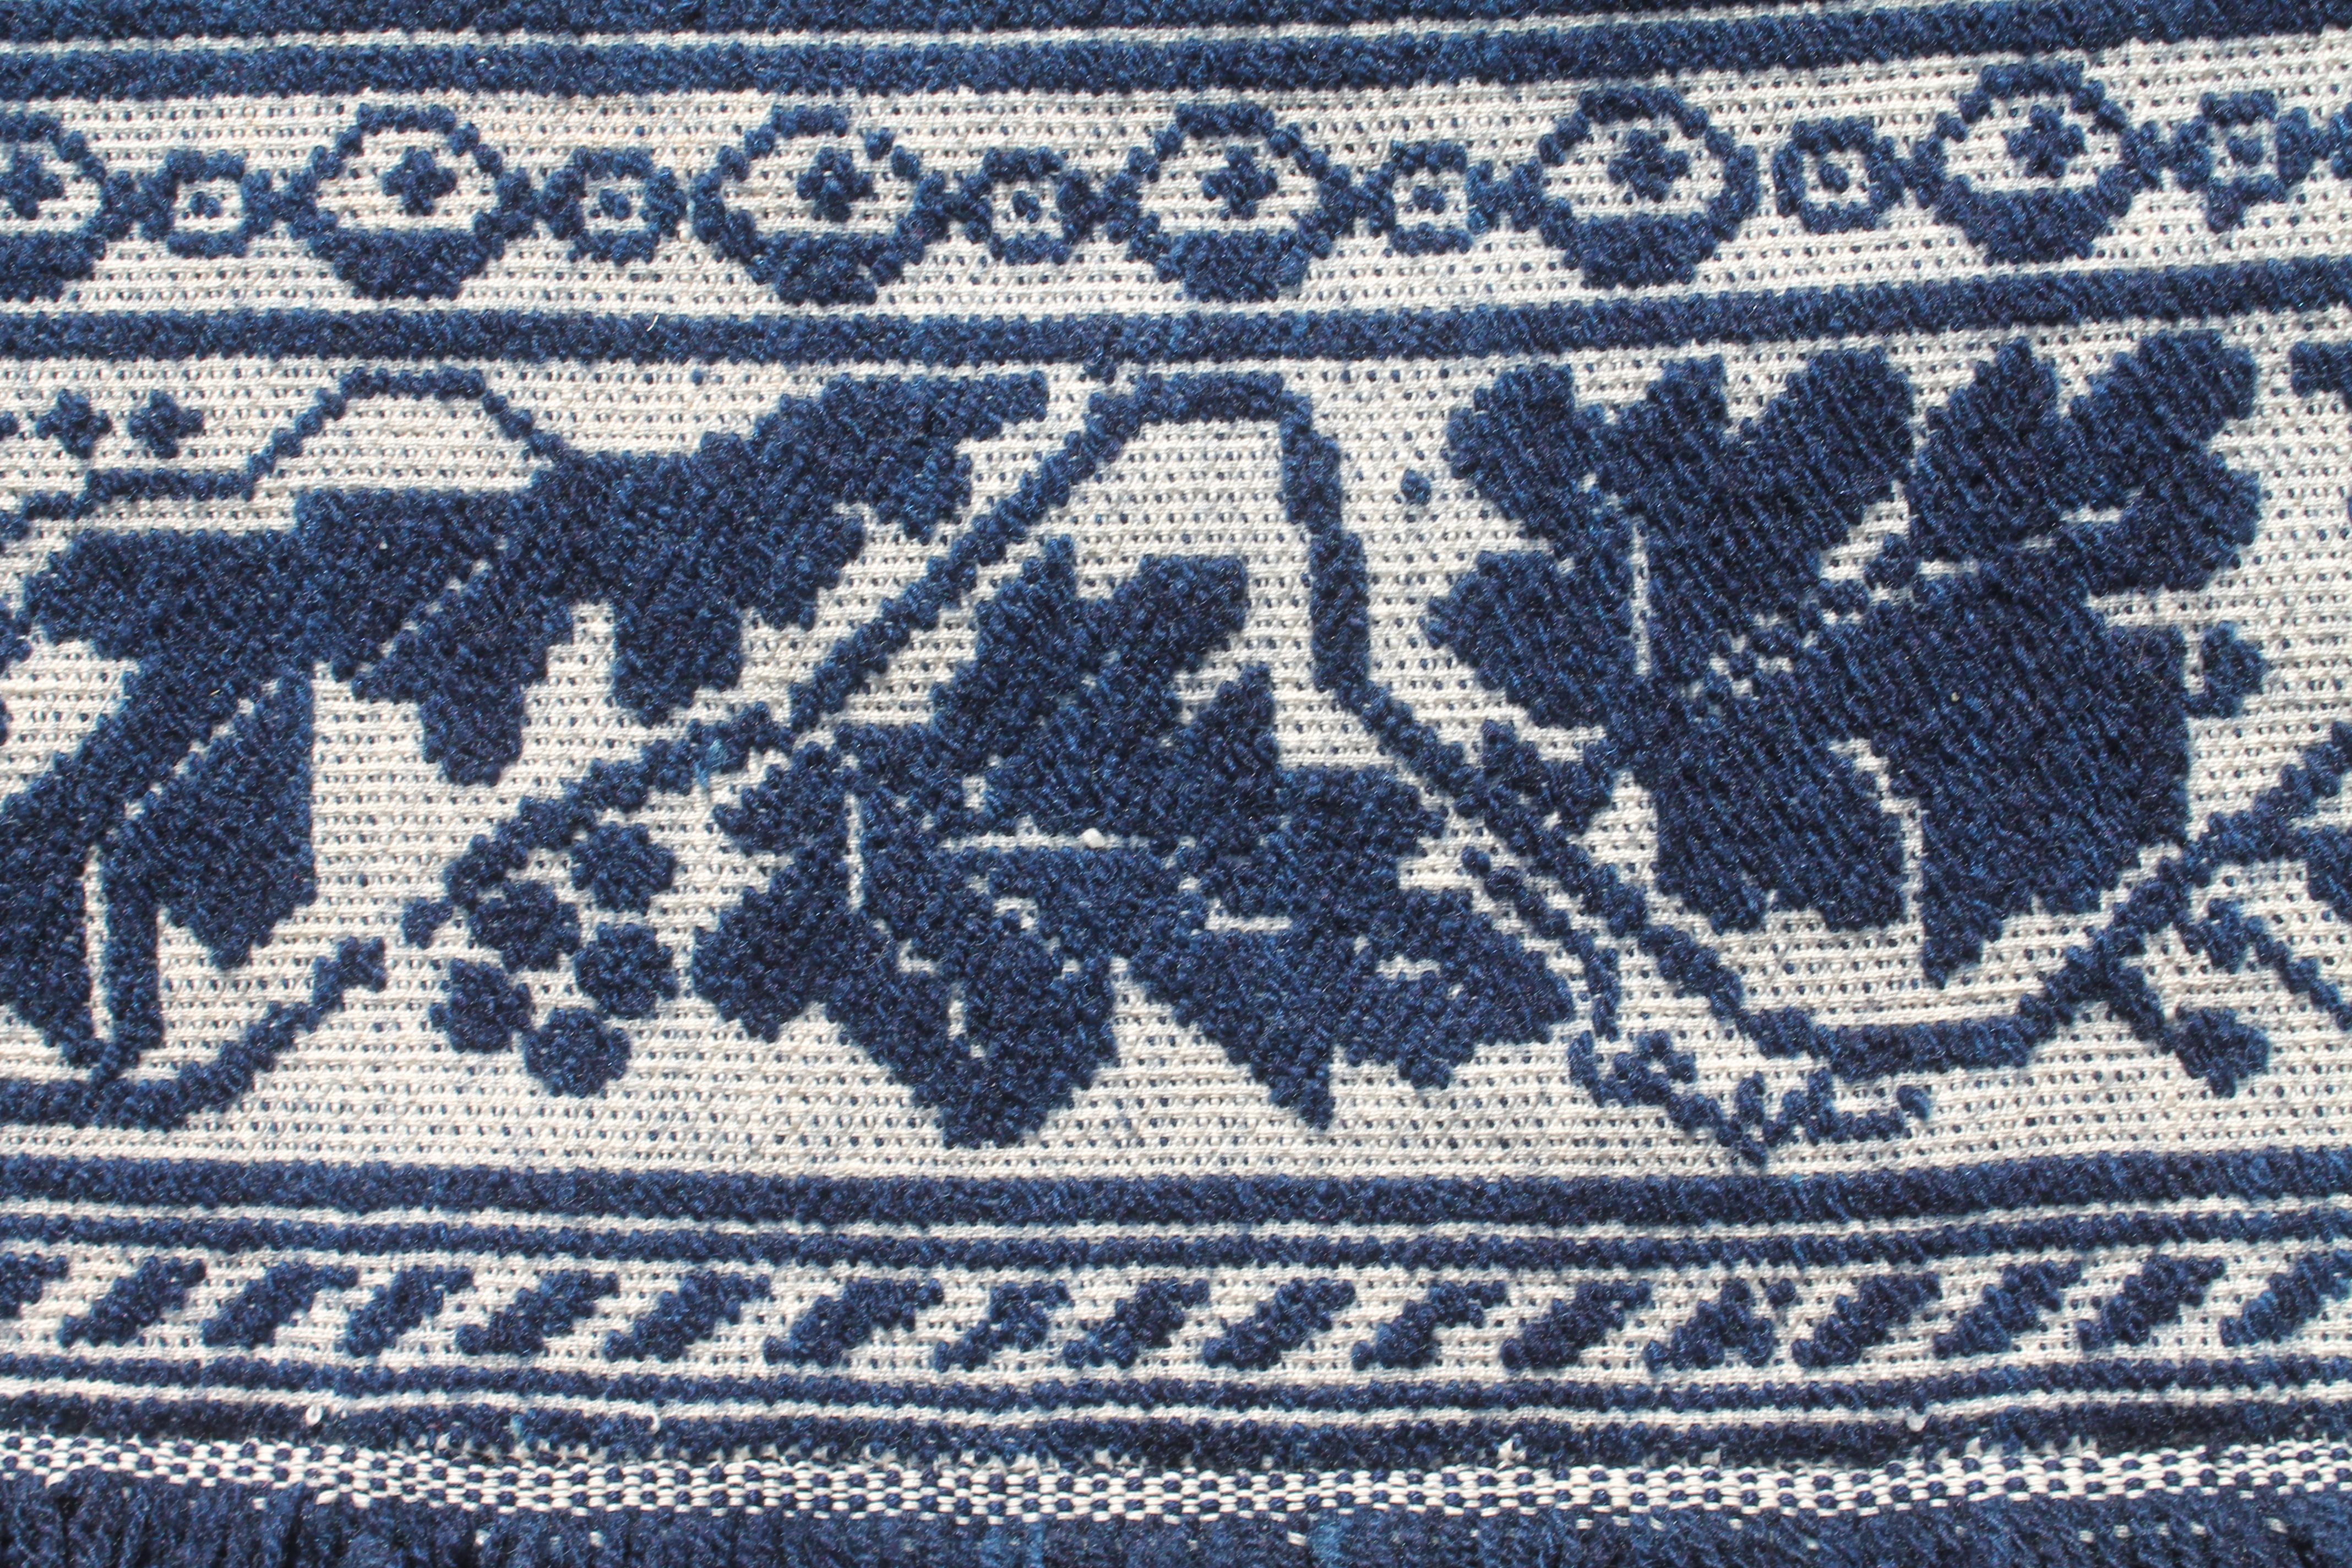 19Thc Blue & White Woven Jacquard Coverlet From Pennsylvania In Good Condition For Sale In Los Angeles, CA